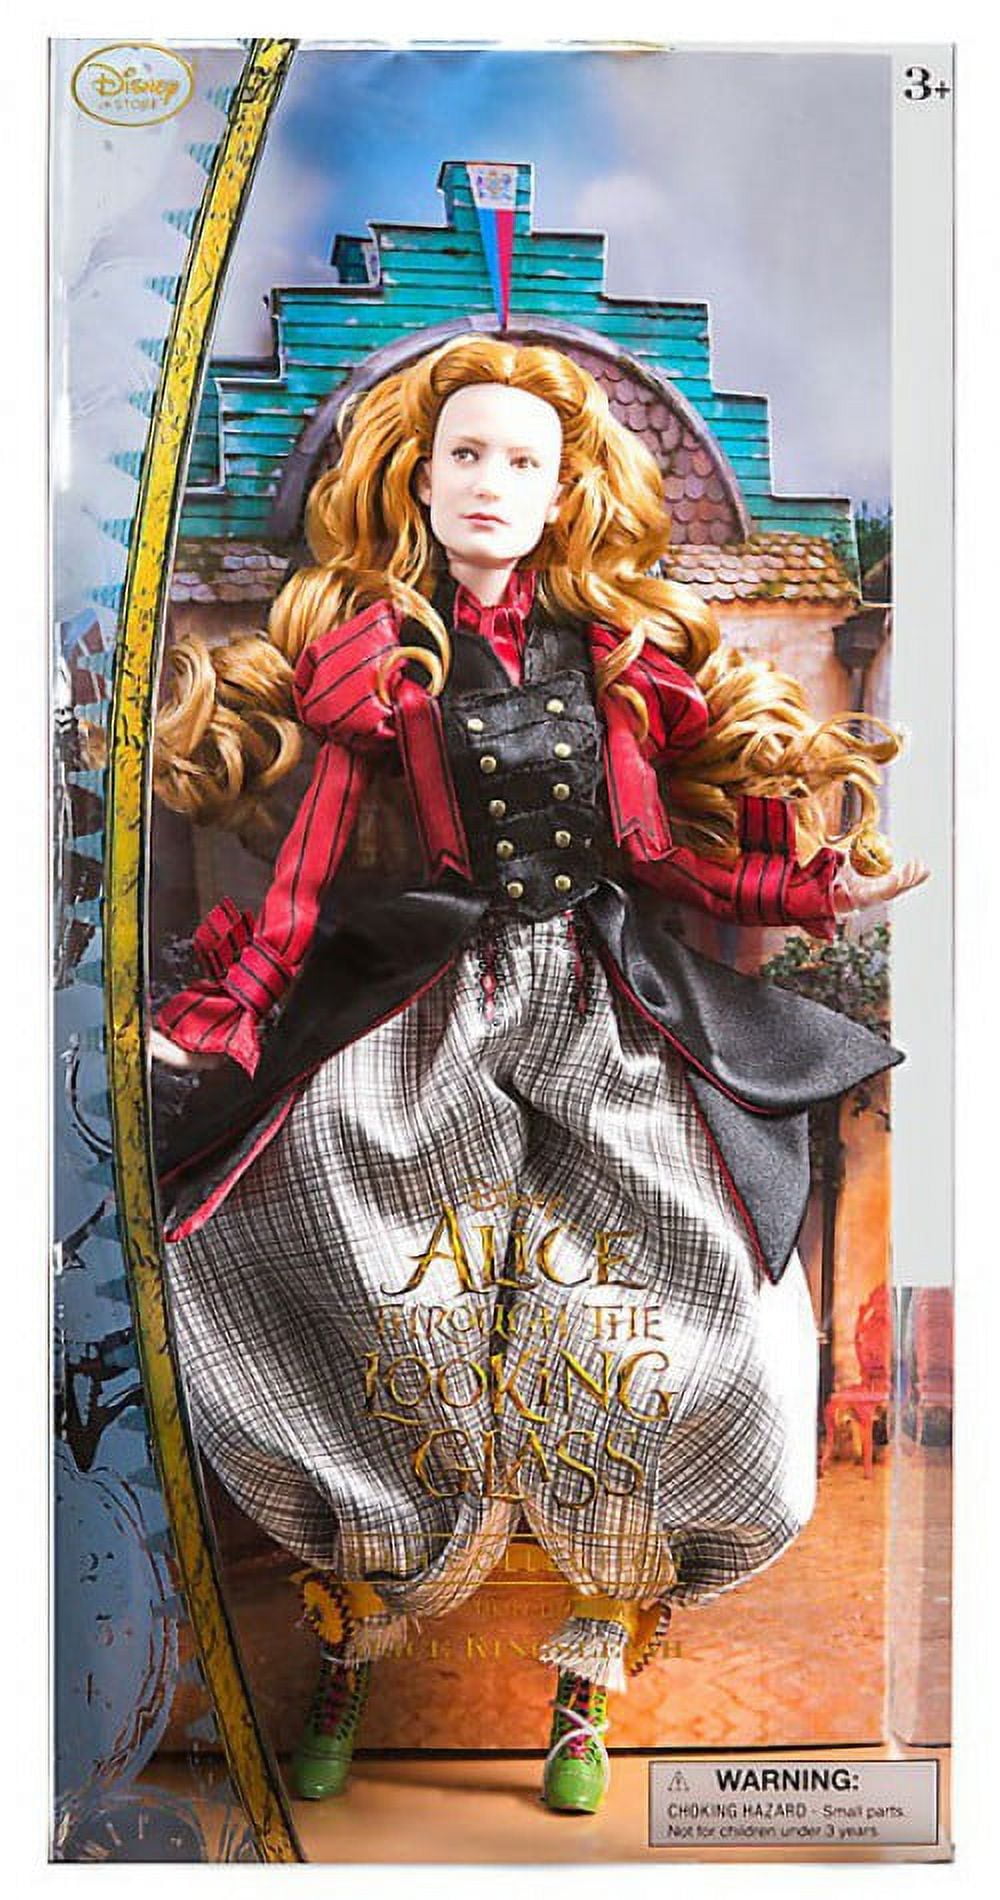 New Limited Edition Deluxe Dolls: Alice in Wonderland & The